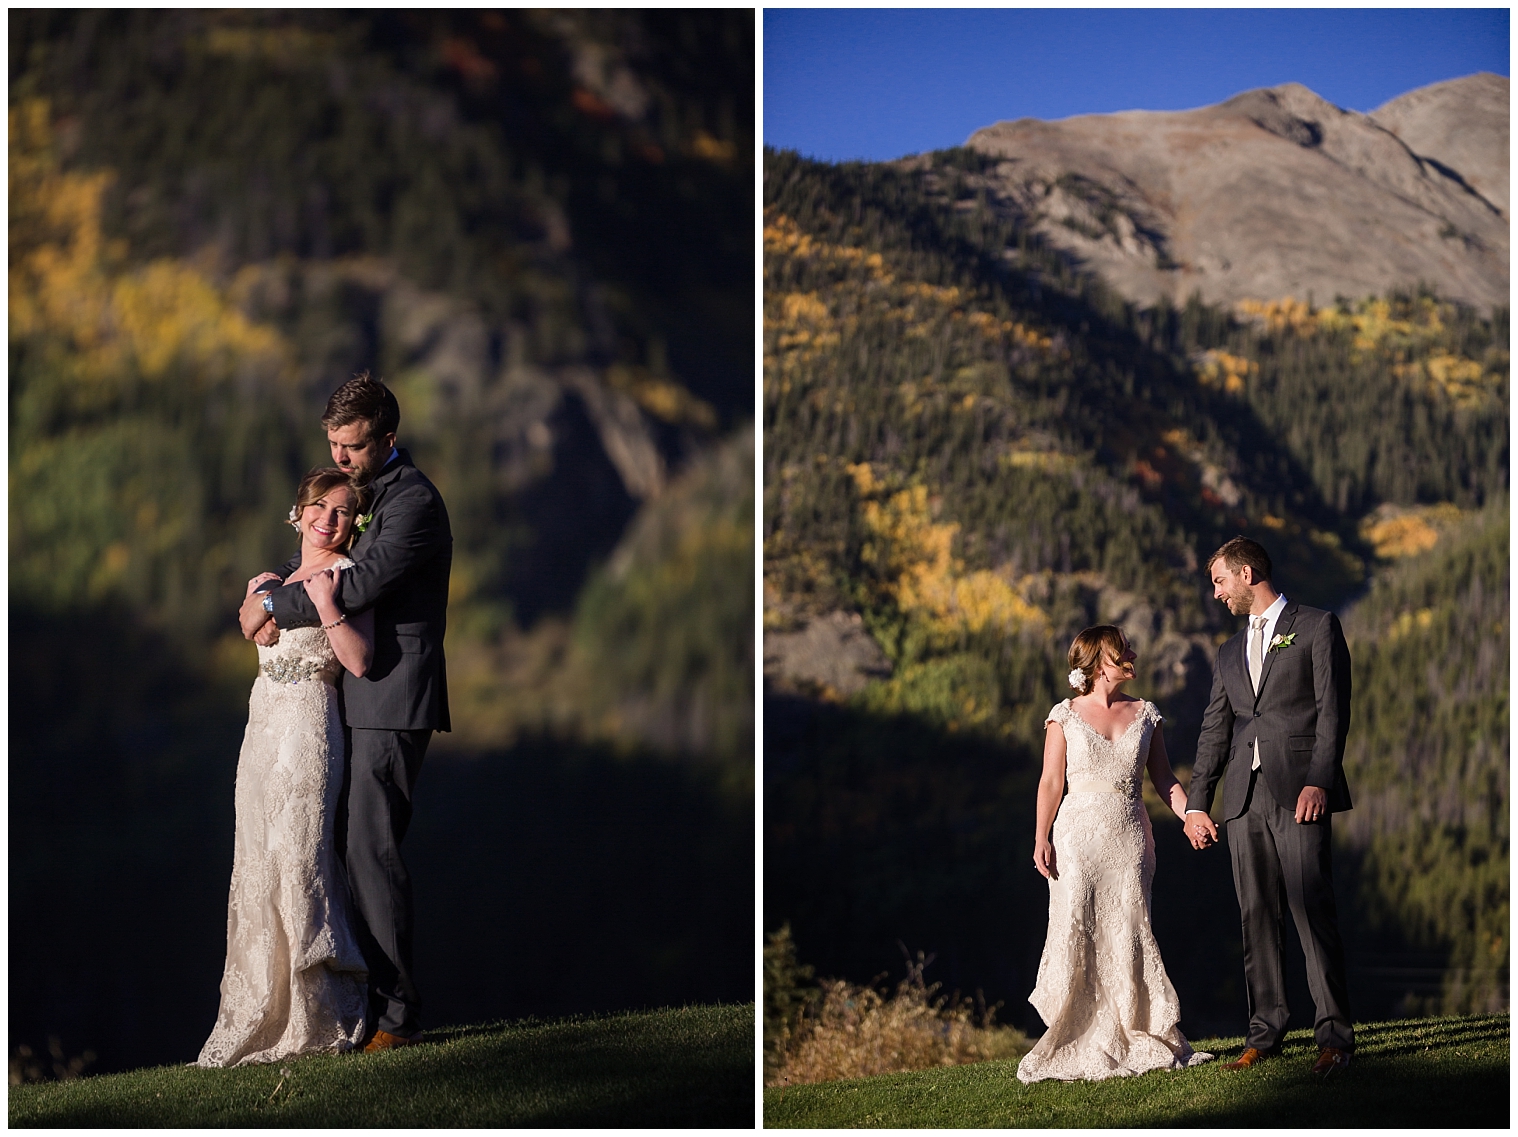 During their Copper Mountain wedding photos, the bride and groom embrace.